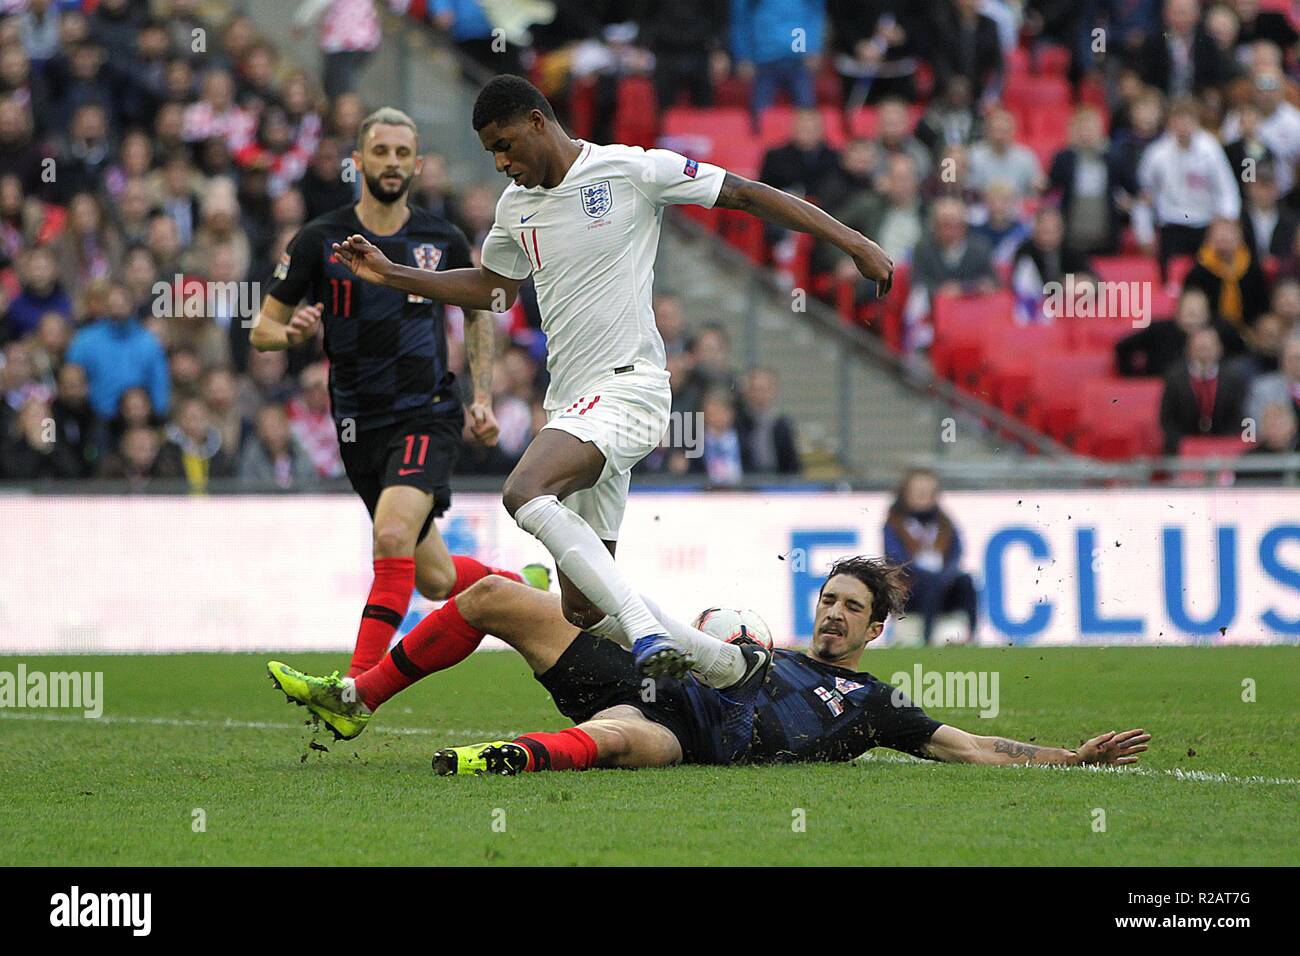 London, UK. 18th November 2018. Marcus Rashford of England is tackled by Sime Vrsaljko of Croatia during the UEFA Nations League League A Group 4 match between England and Croatia at Wembley Stadium on November 18th 2018 in London, England. (Photo by Matt Bradshaw/phcimages.com) Credit: PHC Images/Alamy Live News Stock Photo